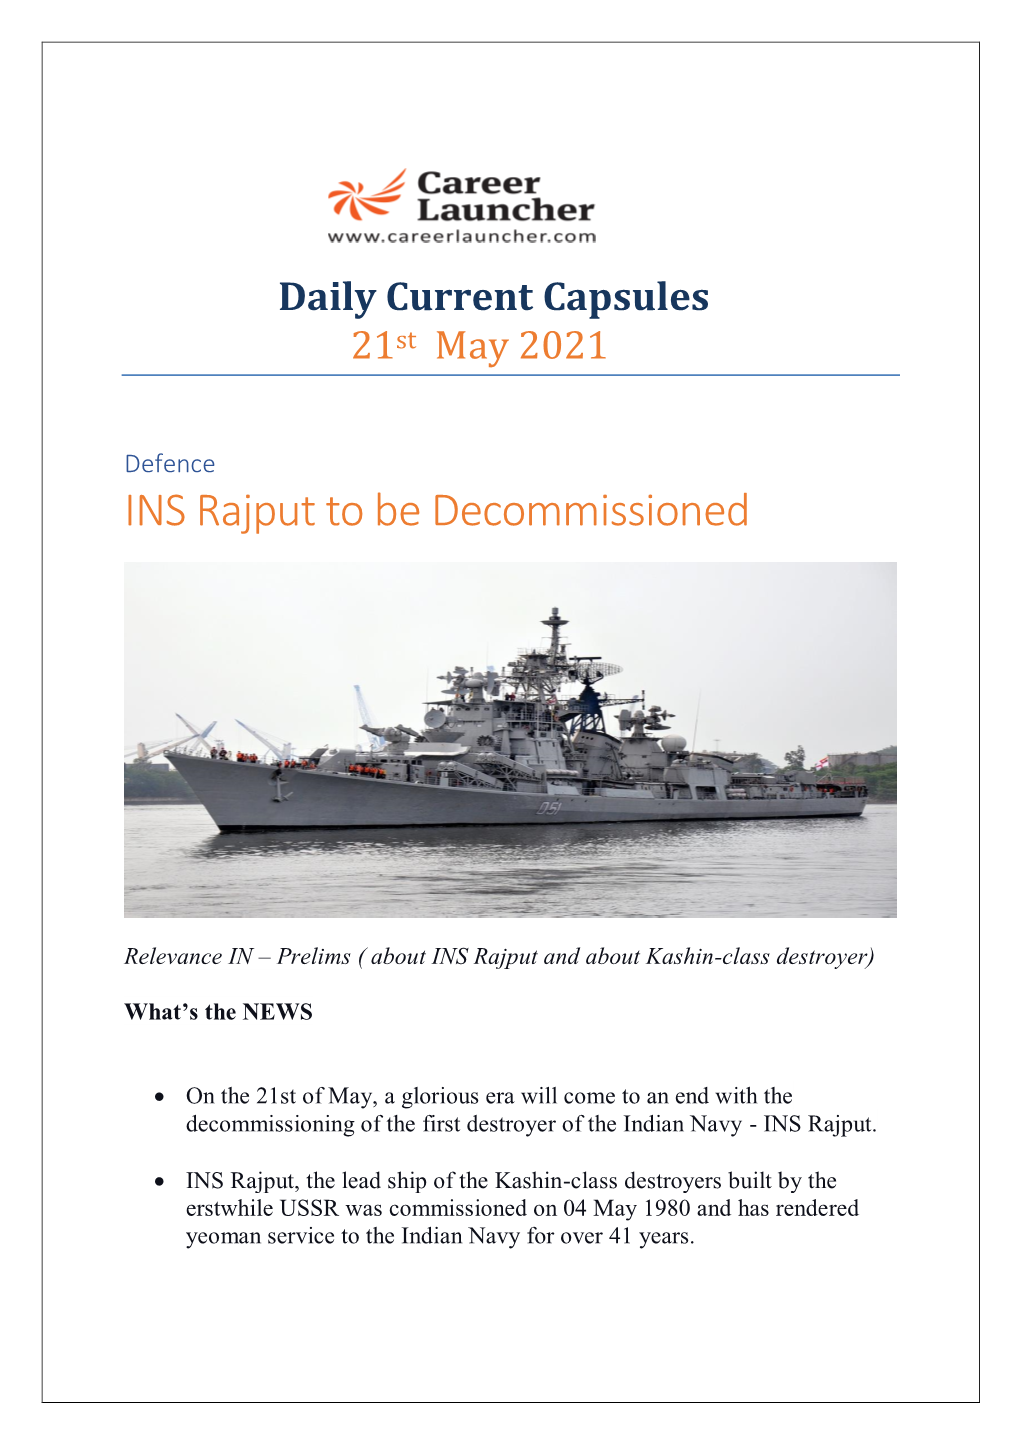 INS Rajput to Be Decommissioned